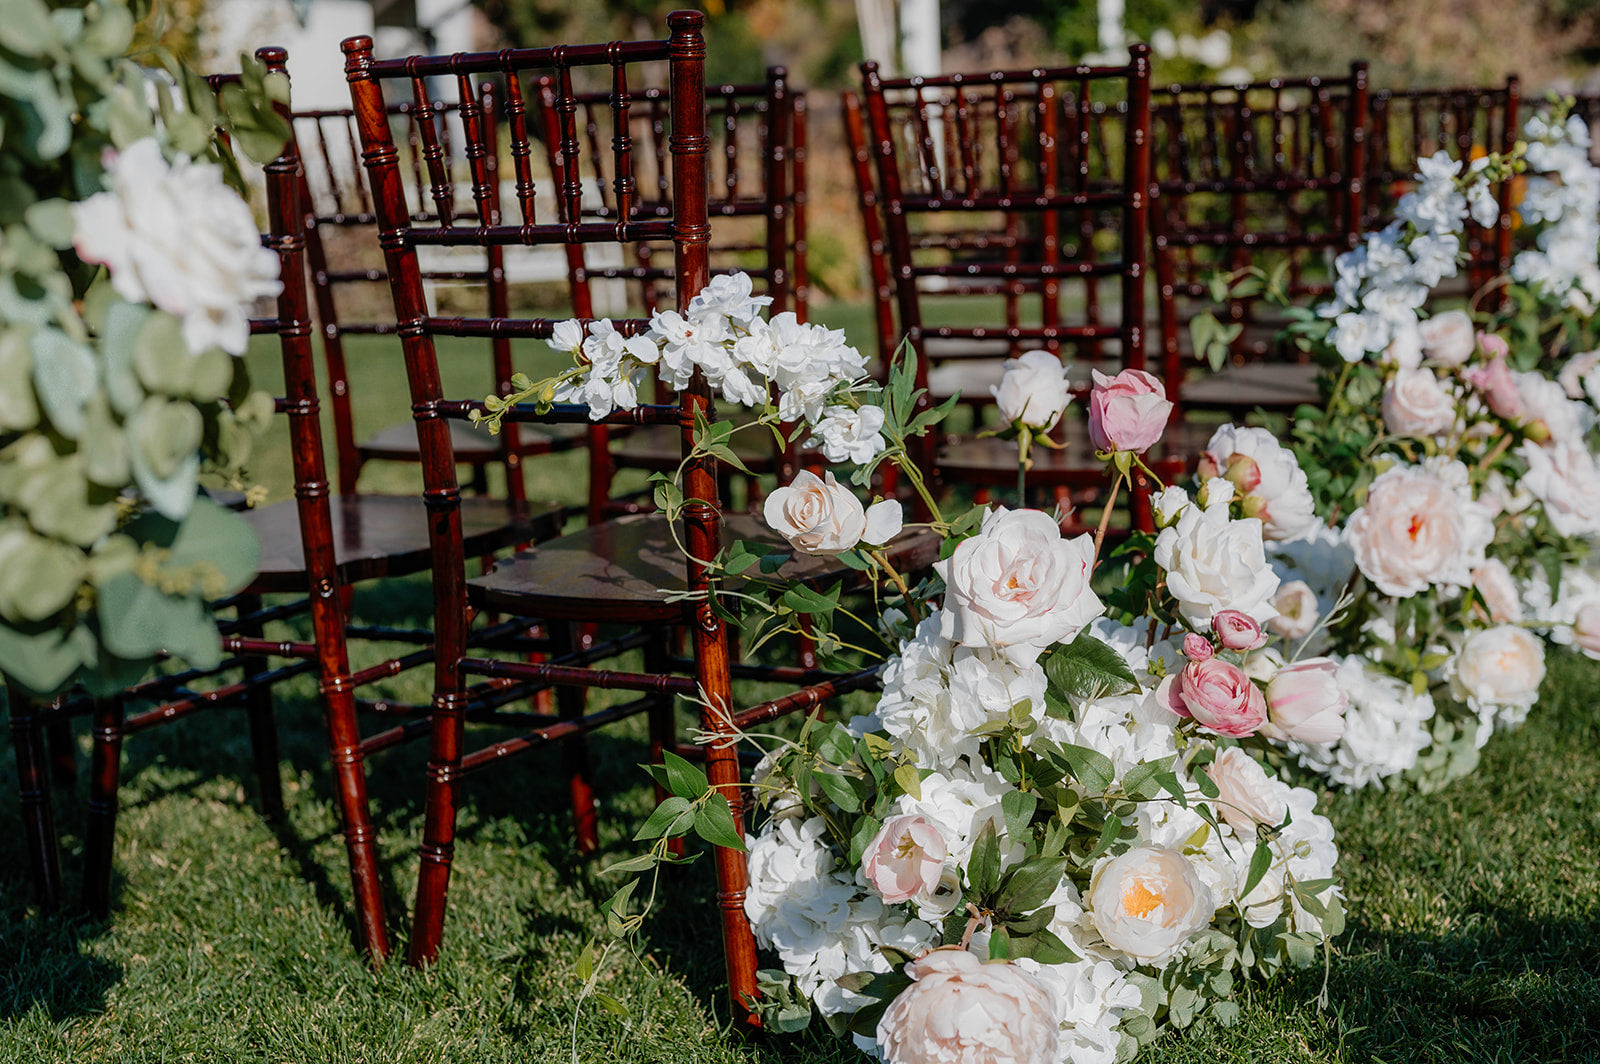 arch rental for wedding with blush pink aisle flowers